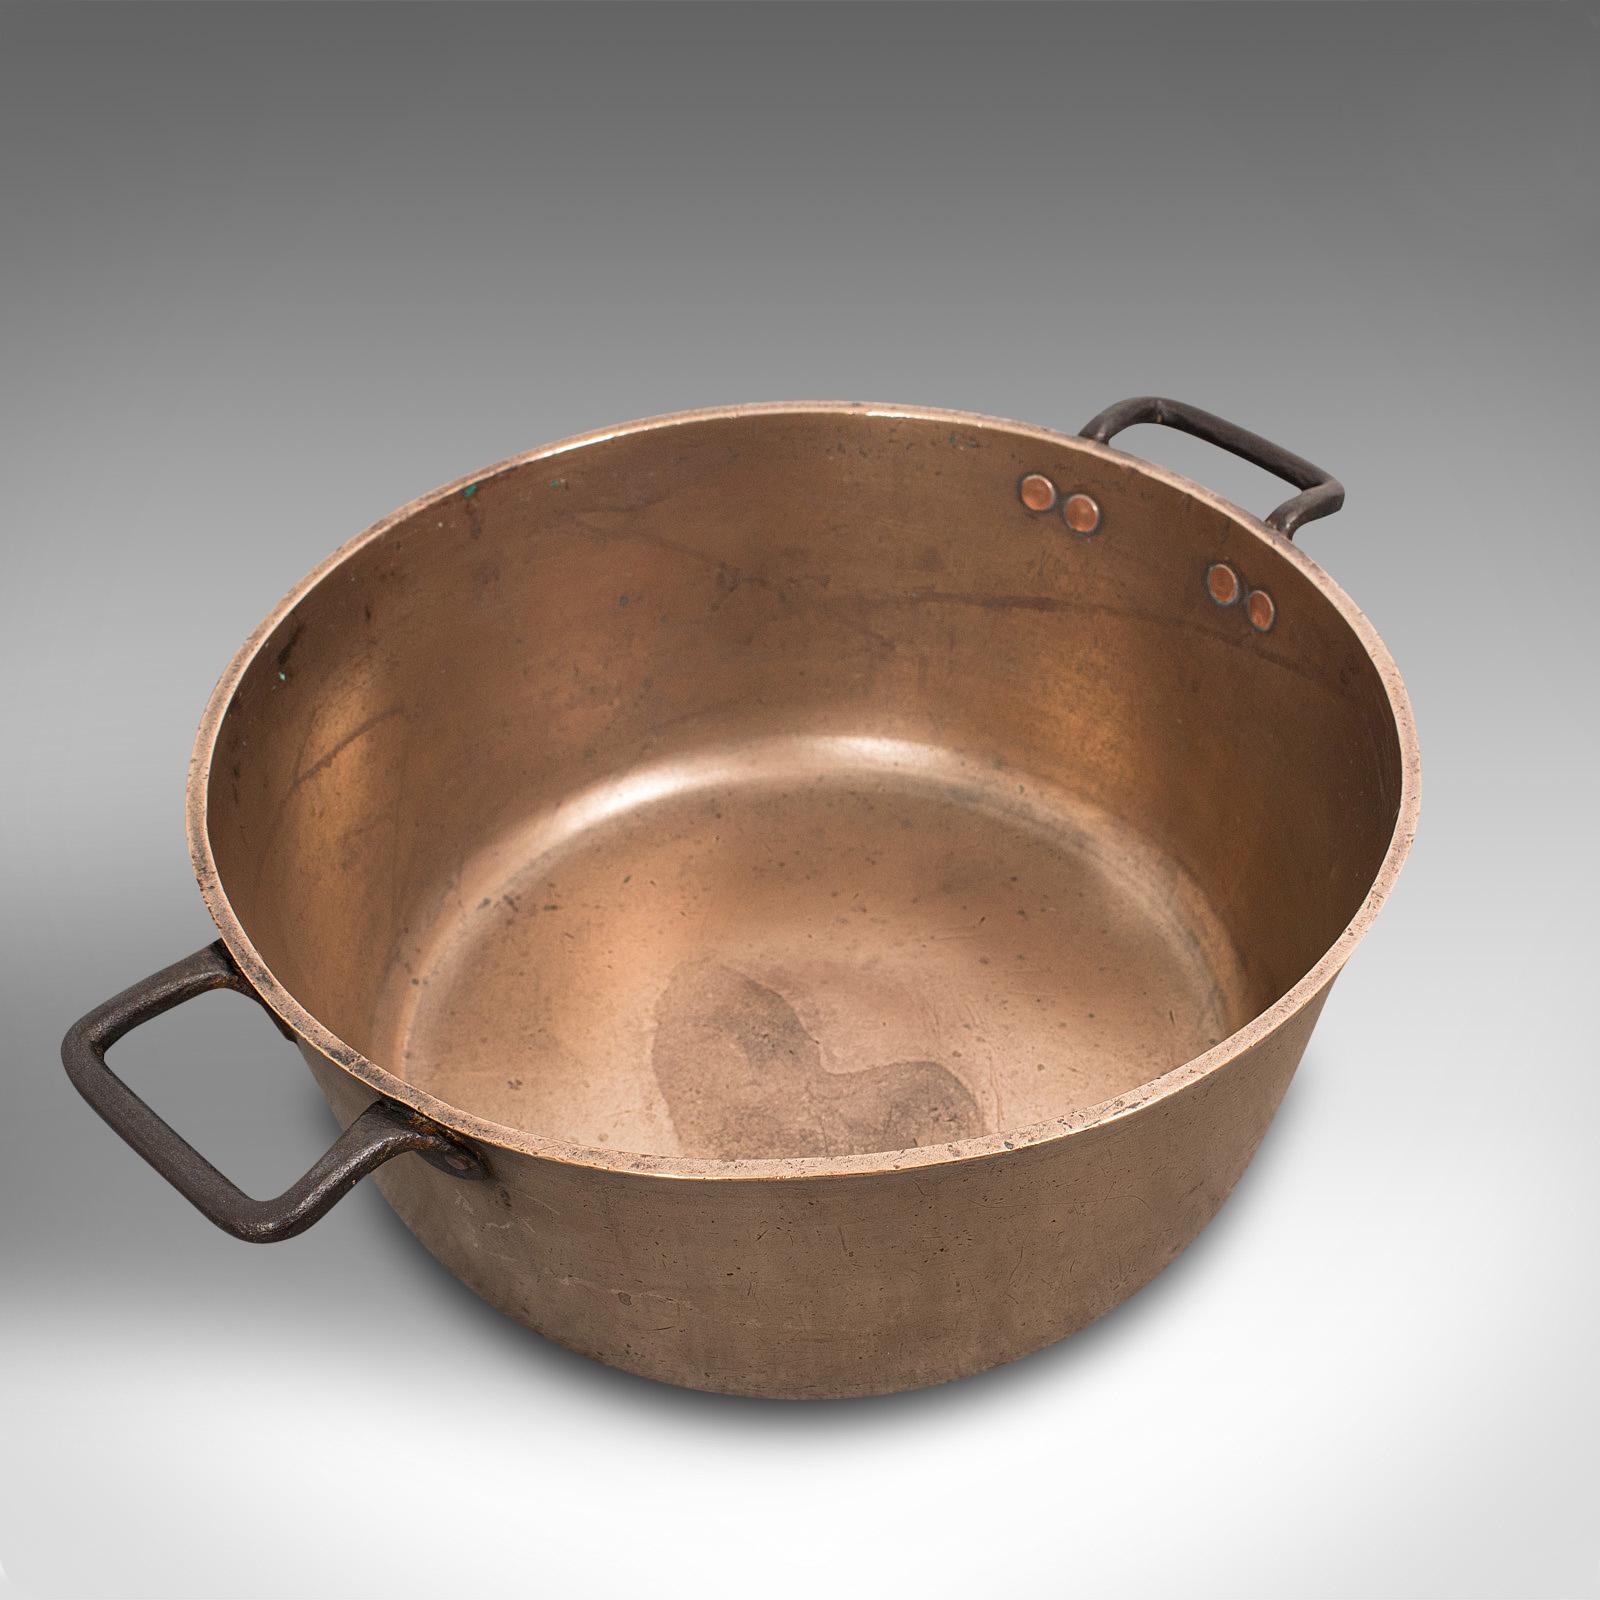 British Antique Jam Pan, English, Bronze, Preserves Cooking Pot, Late 18th Century For Sale